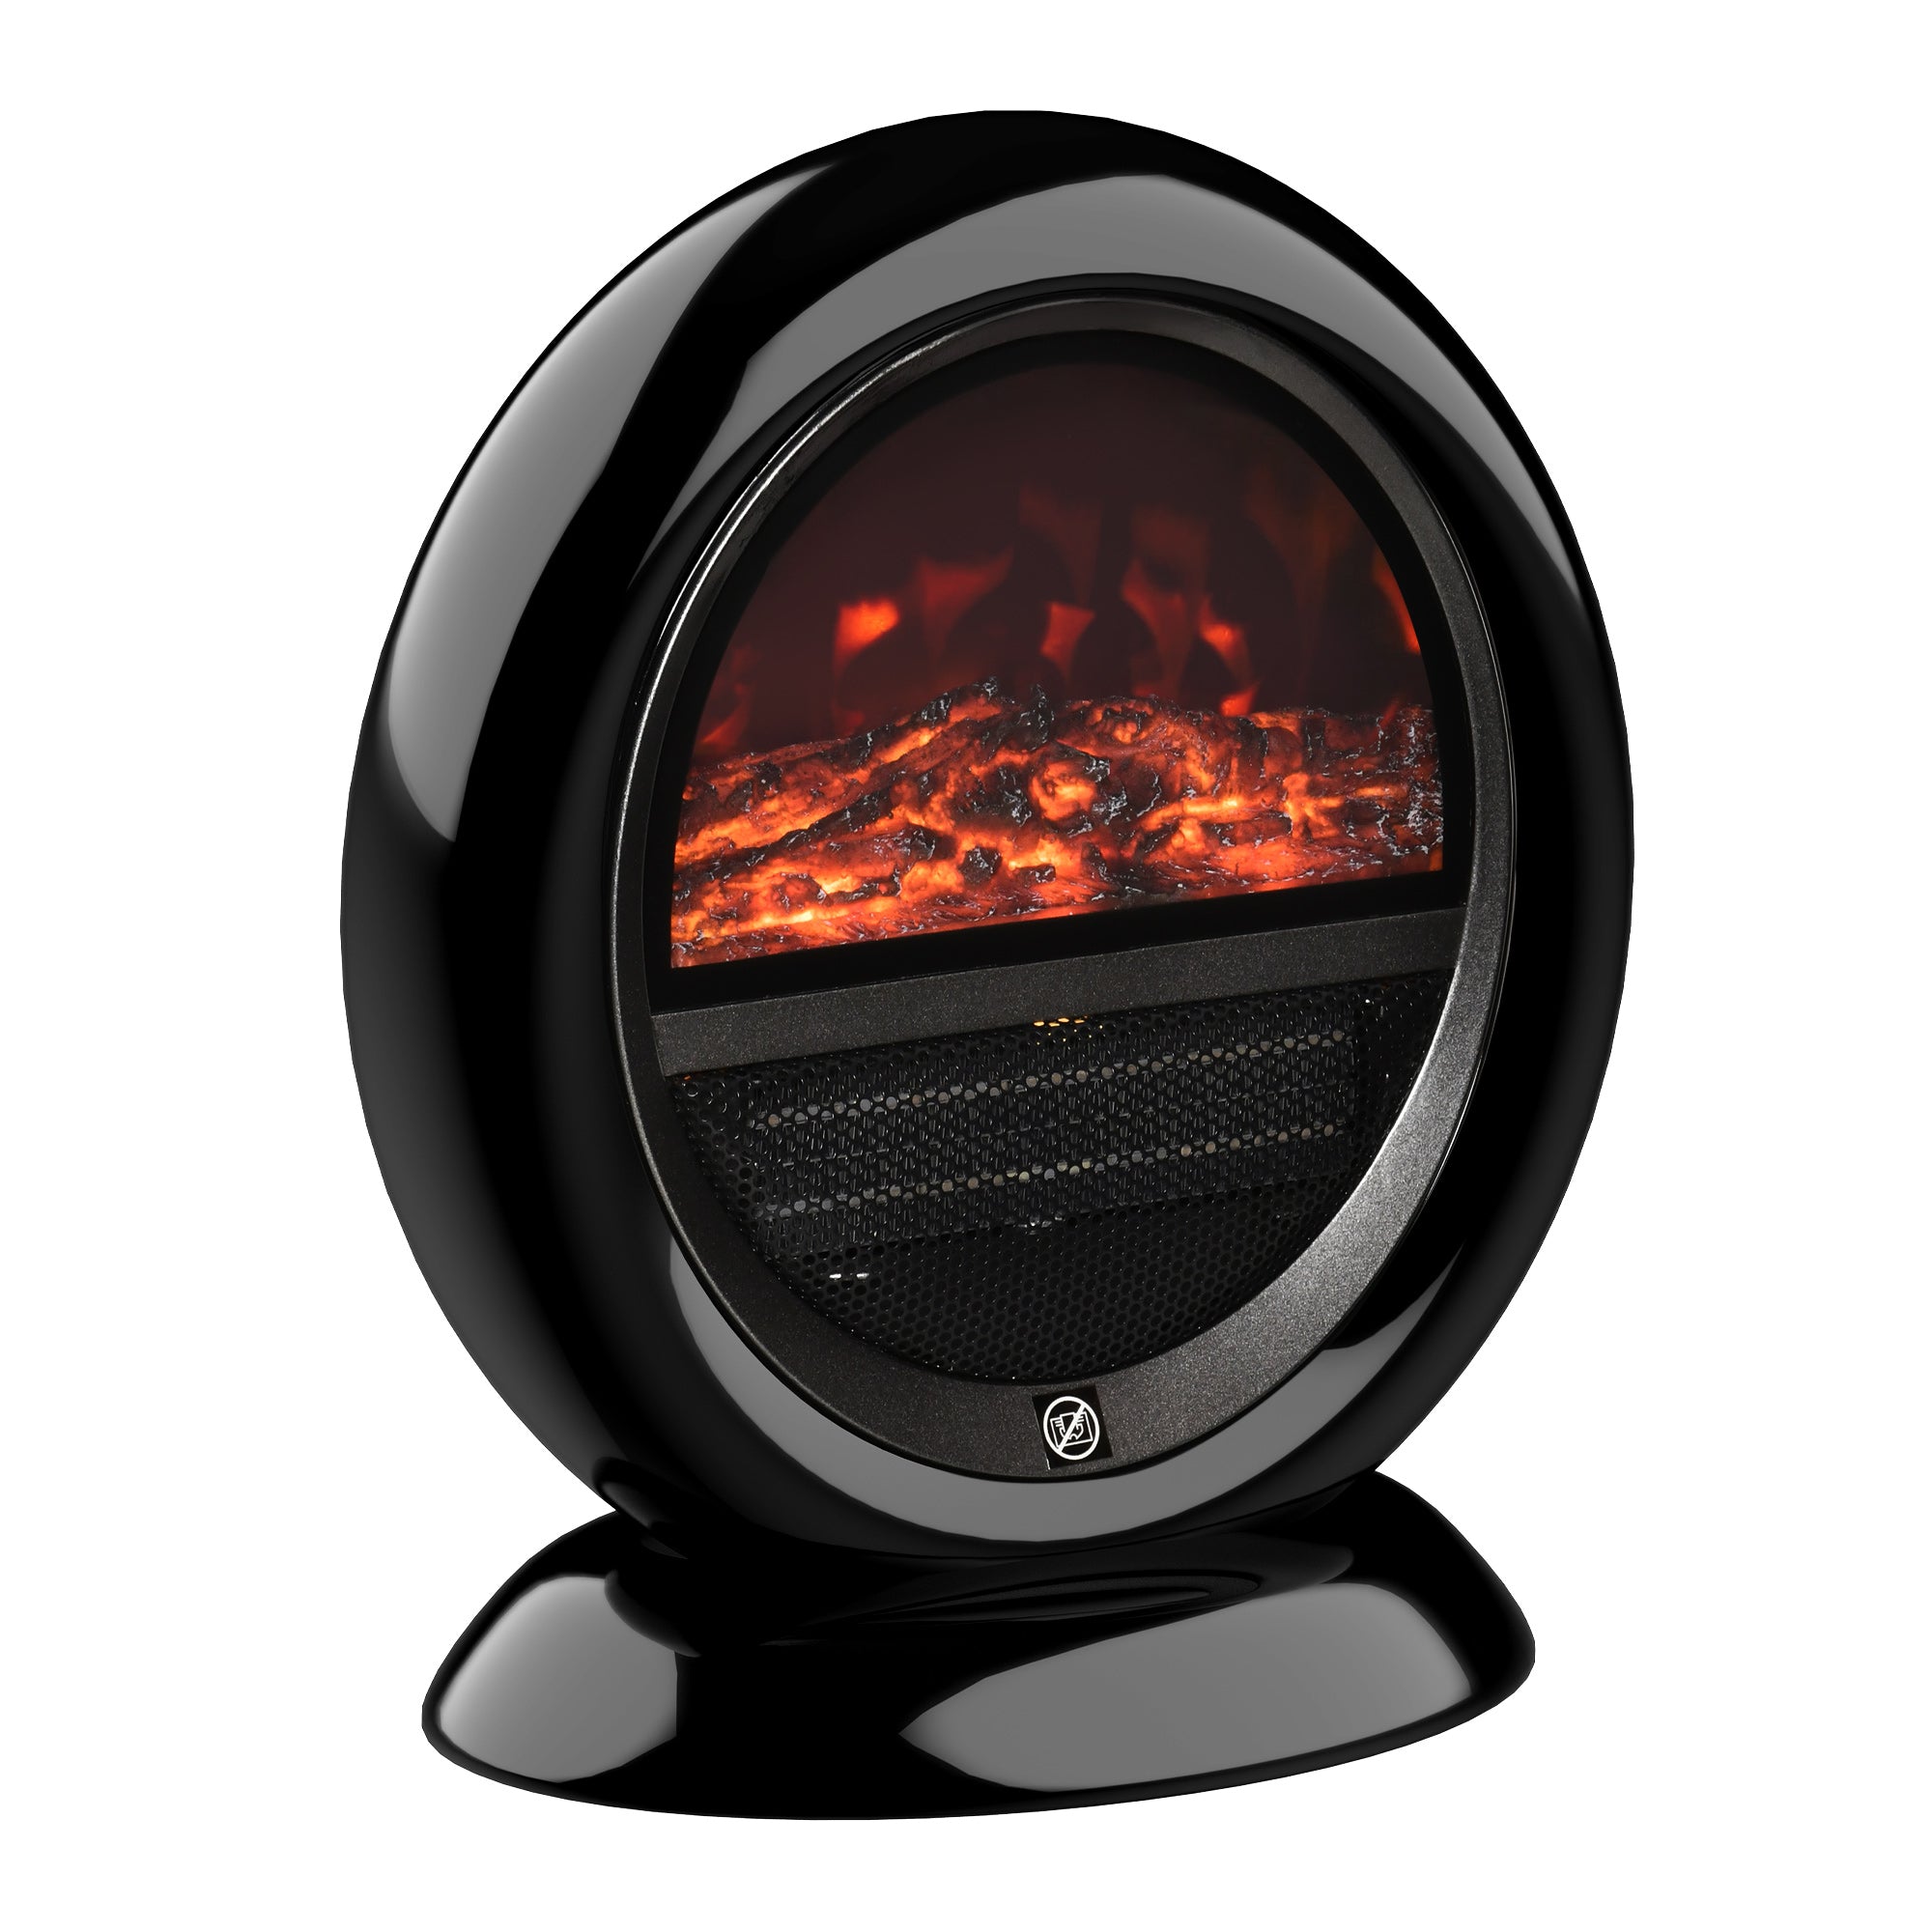 HOMCOM Freestanding Electric Fireplace Indoor Space Table Top Heater with Realistic Flame Effect - Rotatable Head - Overheating Protection - 1500W - B